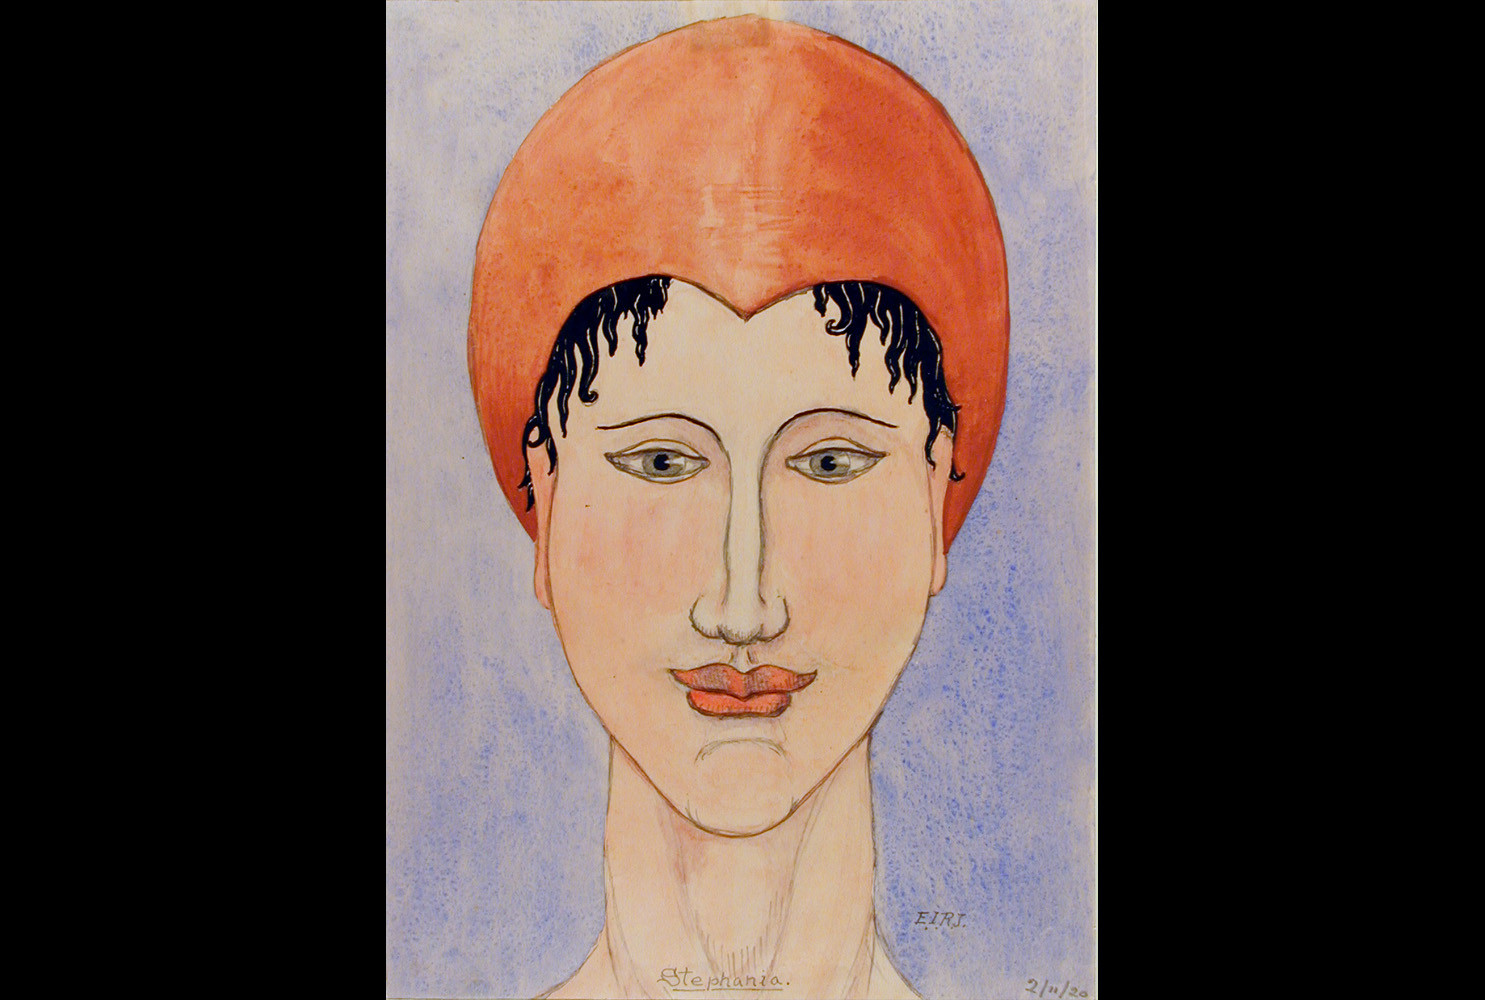 Stephania, by Edward “Ned” I.R. Jennings (American, 1898 – 1929 Watercolor on paper, 10 1/2 x 8 inches. Bequest of Laura Bragg. 1978.029.0010